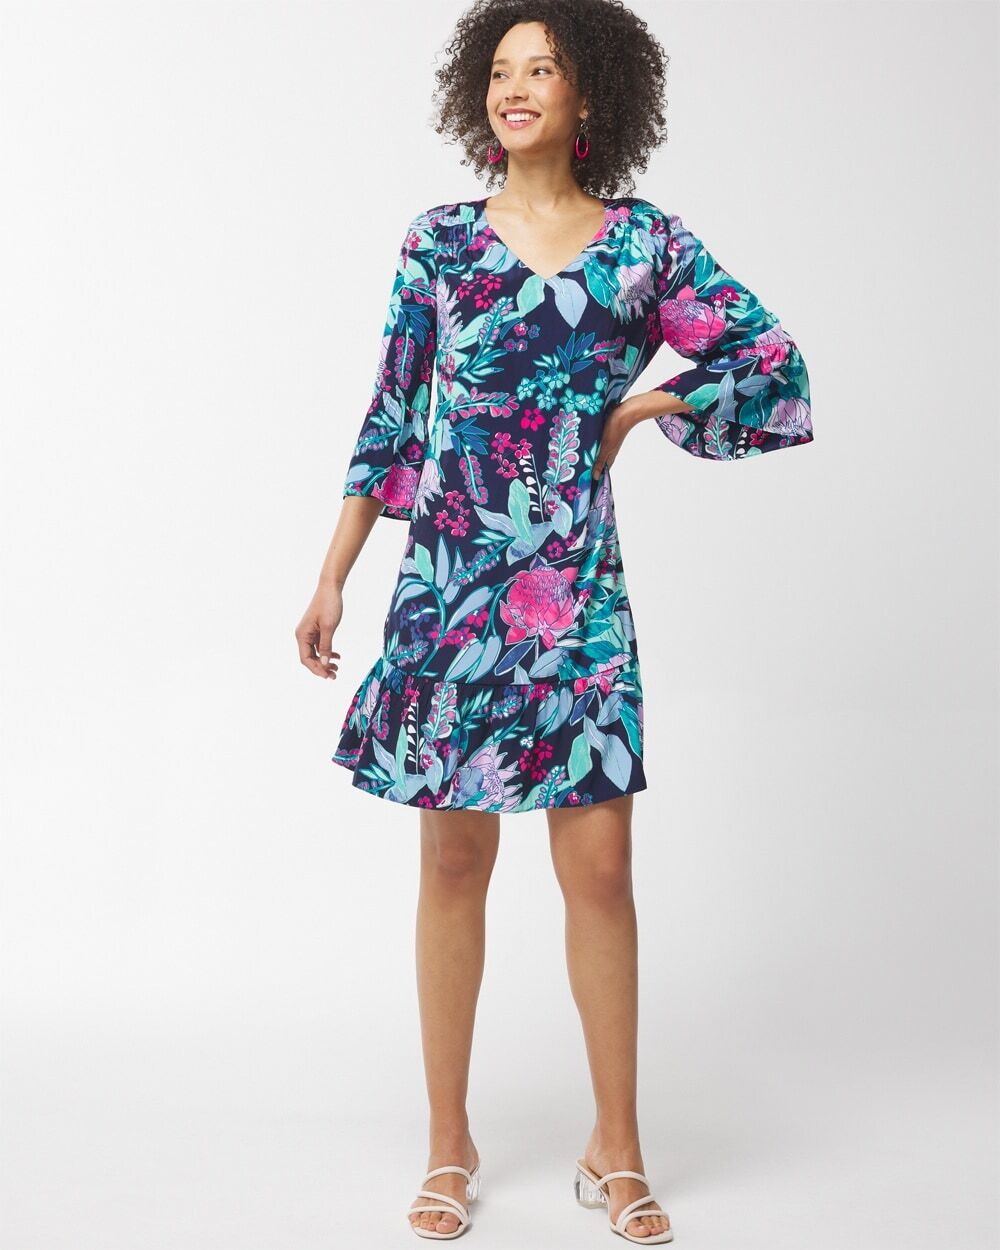 Chico's Off The Rack Women's Brilliant Blooms Knee-Length Dress in Midnight Dark Blue Size 8/10   Chico's Outlet, Spring Dresses - Midnight Dark Blue - Women - Size: 8/10